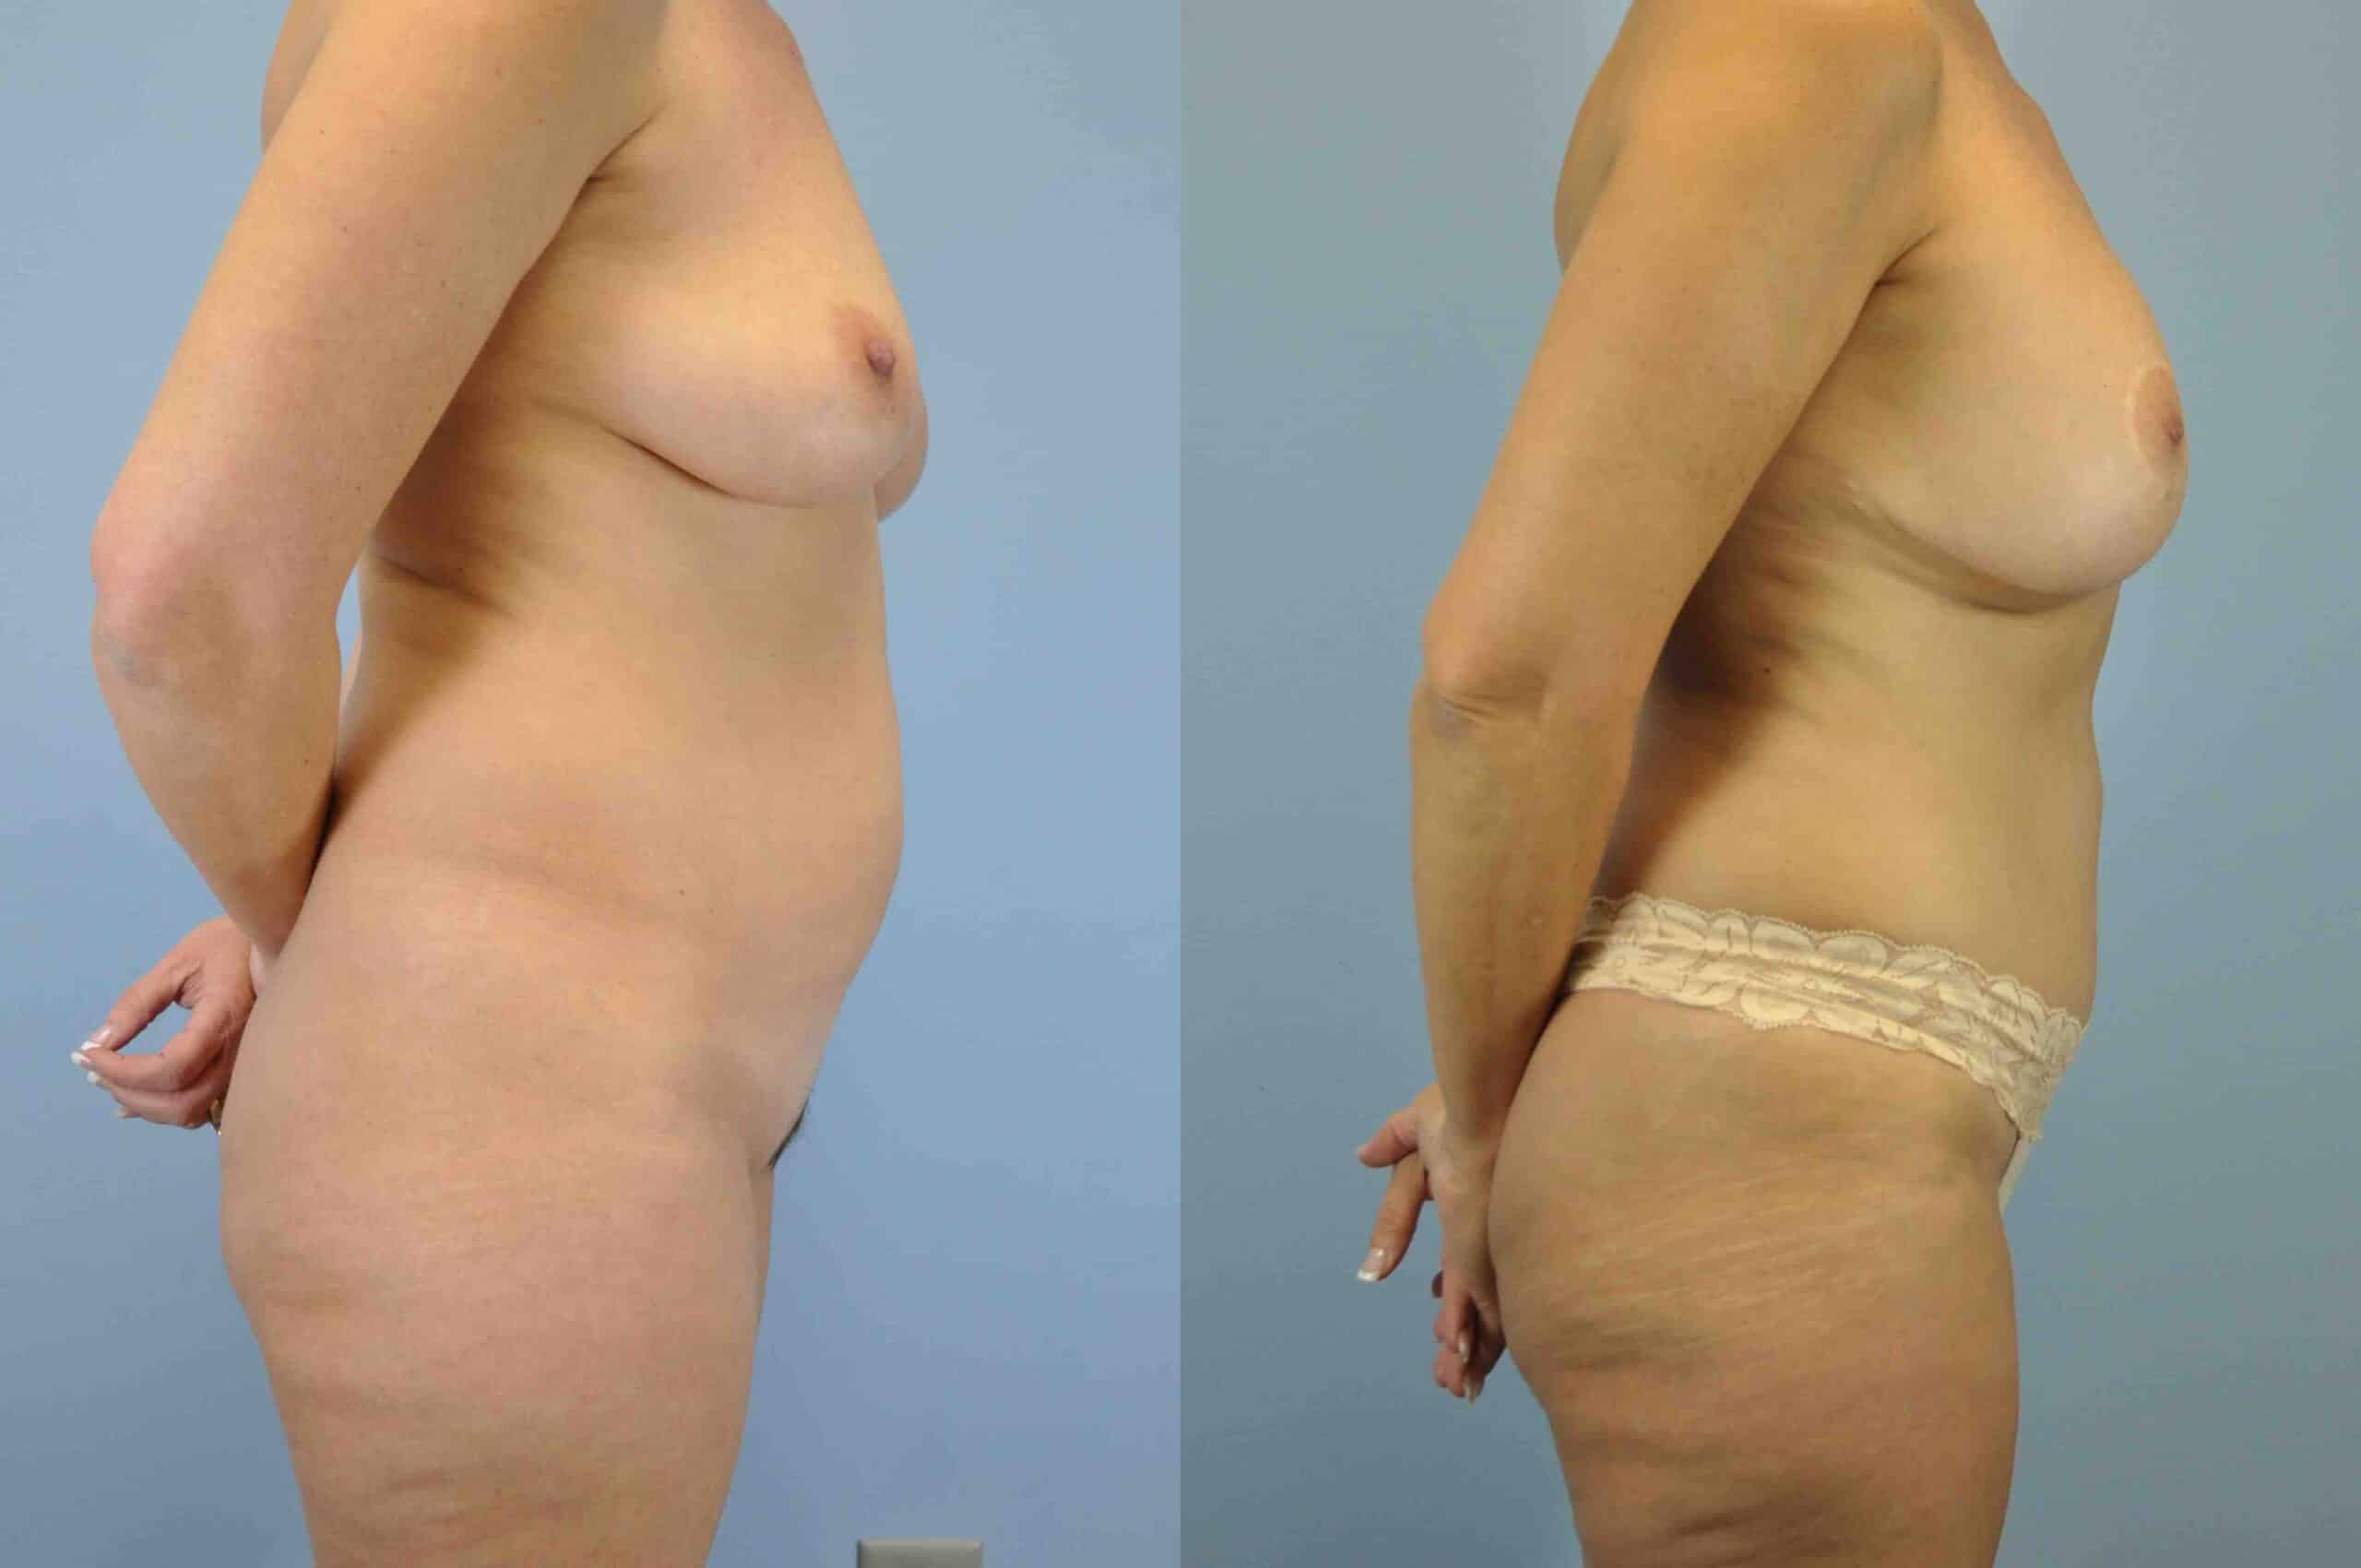 Before and after, 5 yr post op from Tummy Tuck, VASER Abdomen, Flanks, and Mons, Mastopexy/Breast Lift, Breast Augmentation performed by Dr. Paul Vanek (side view)